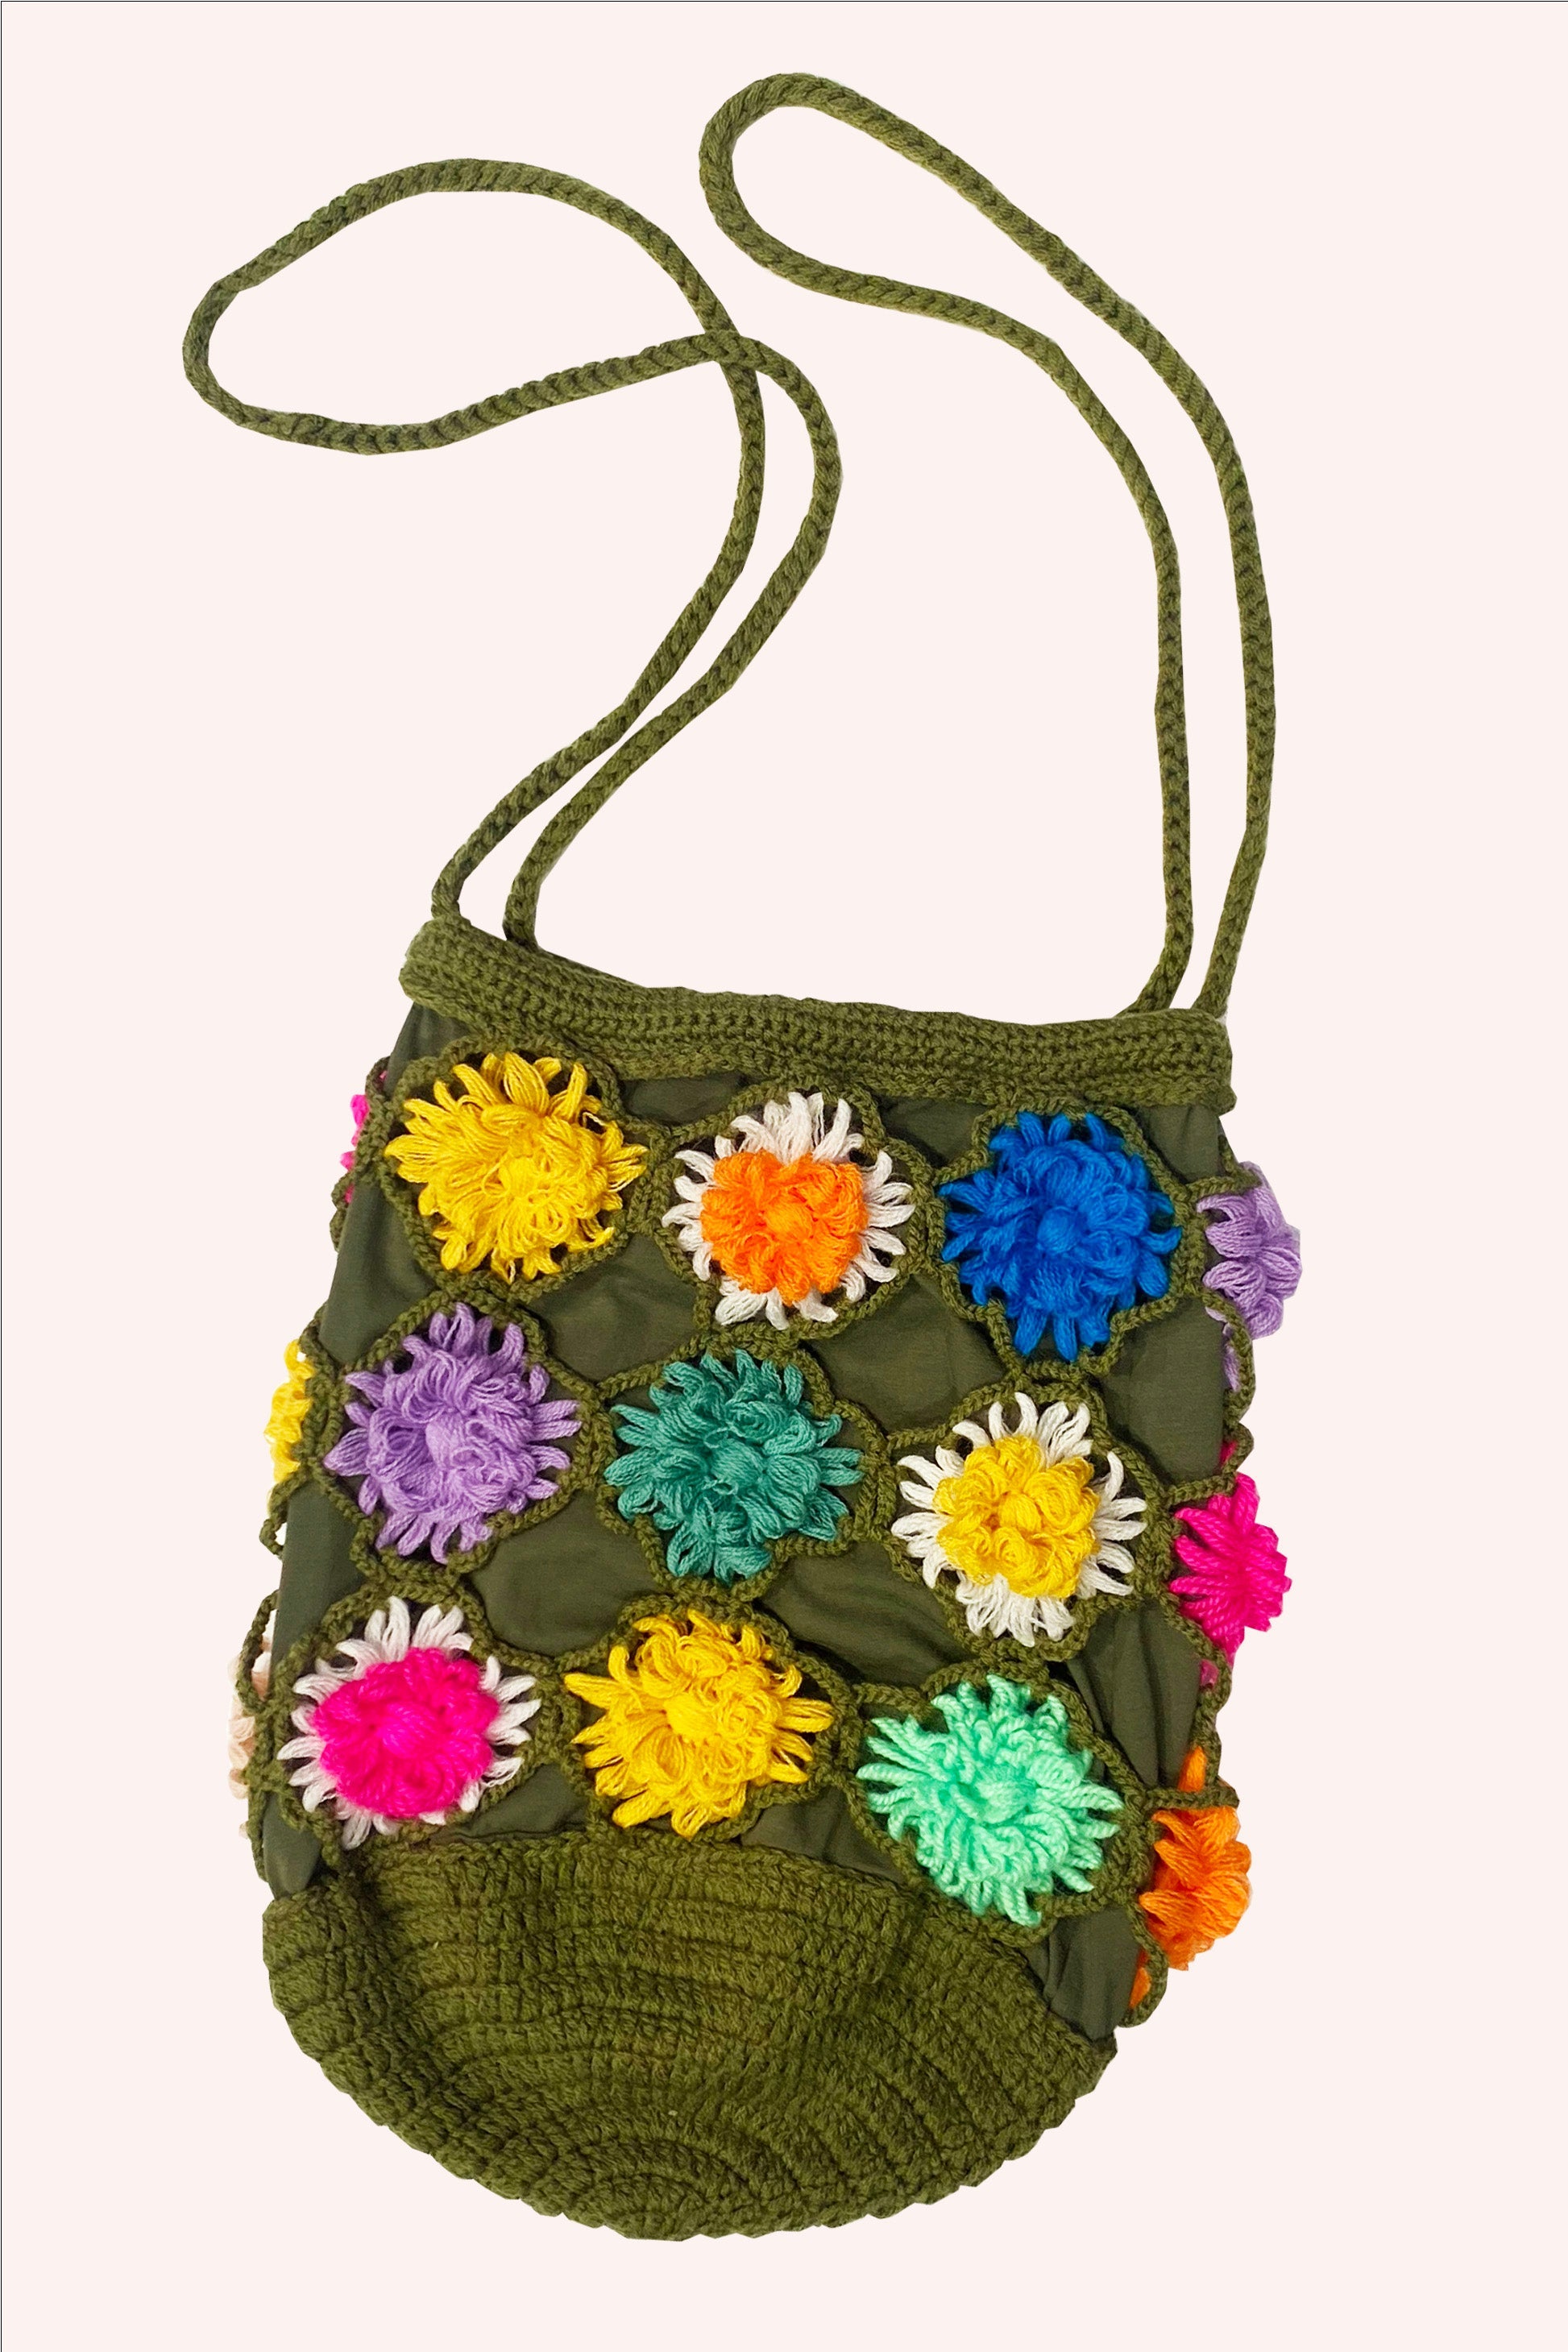 Rainbow 3D Floral Hand Crochet Bag, multicolored flowers in 3D, military green, and top with 2-straps 